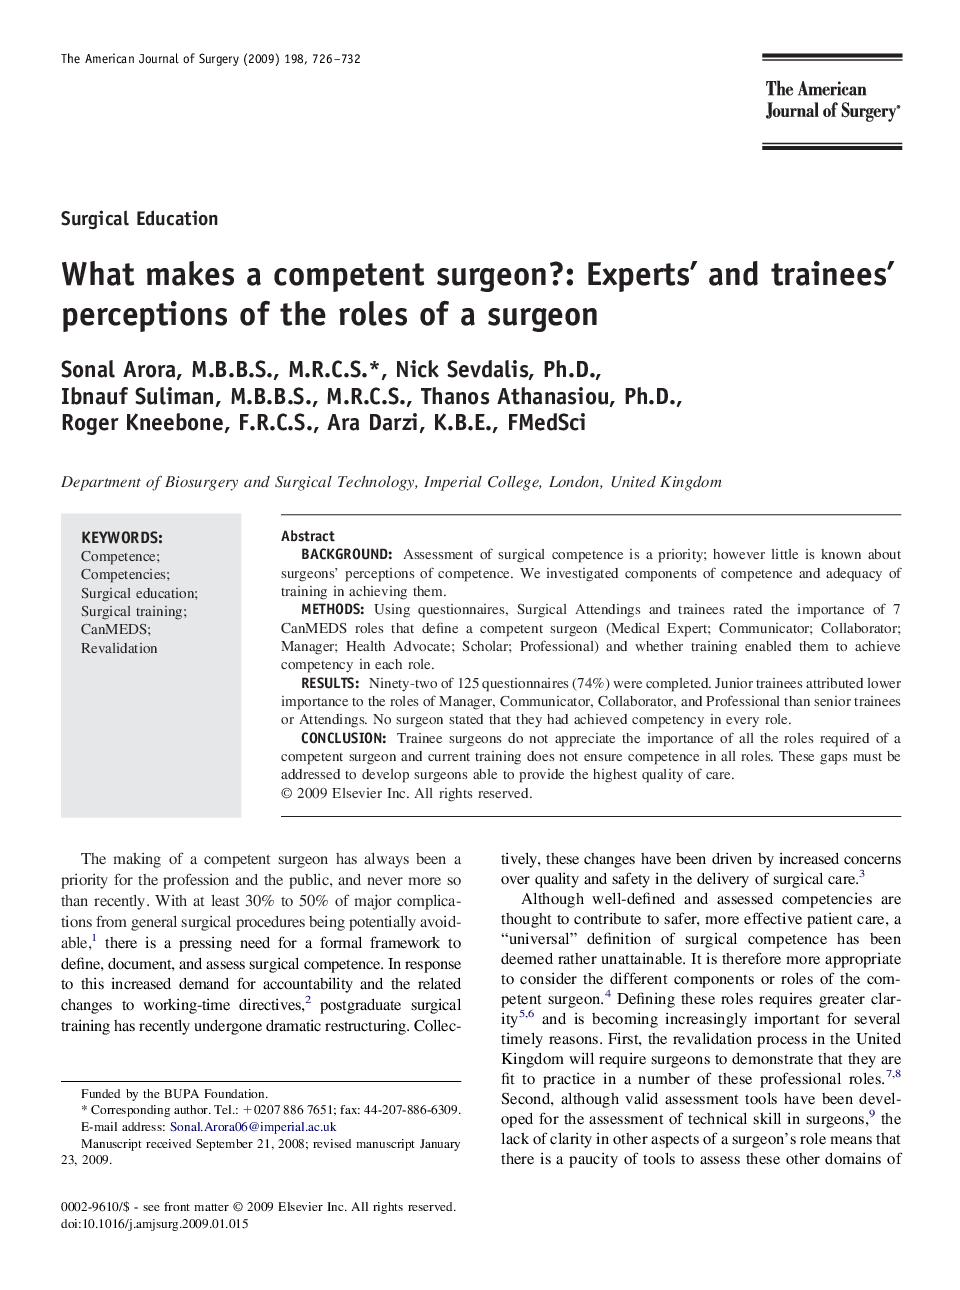 What makes a competent surgeon?: Experts' and trainees' perceptions of the roles of a surgeon 